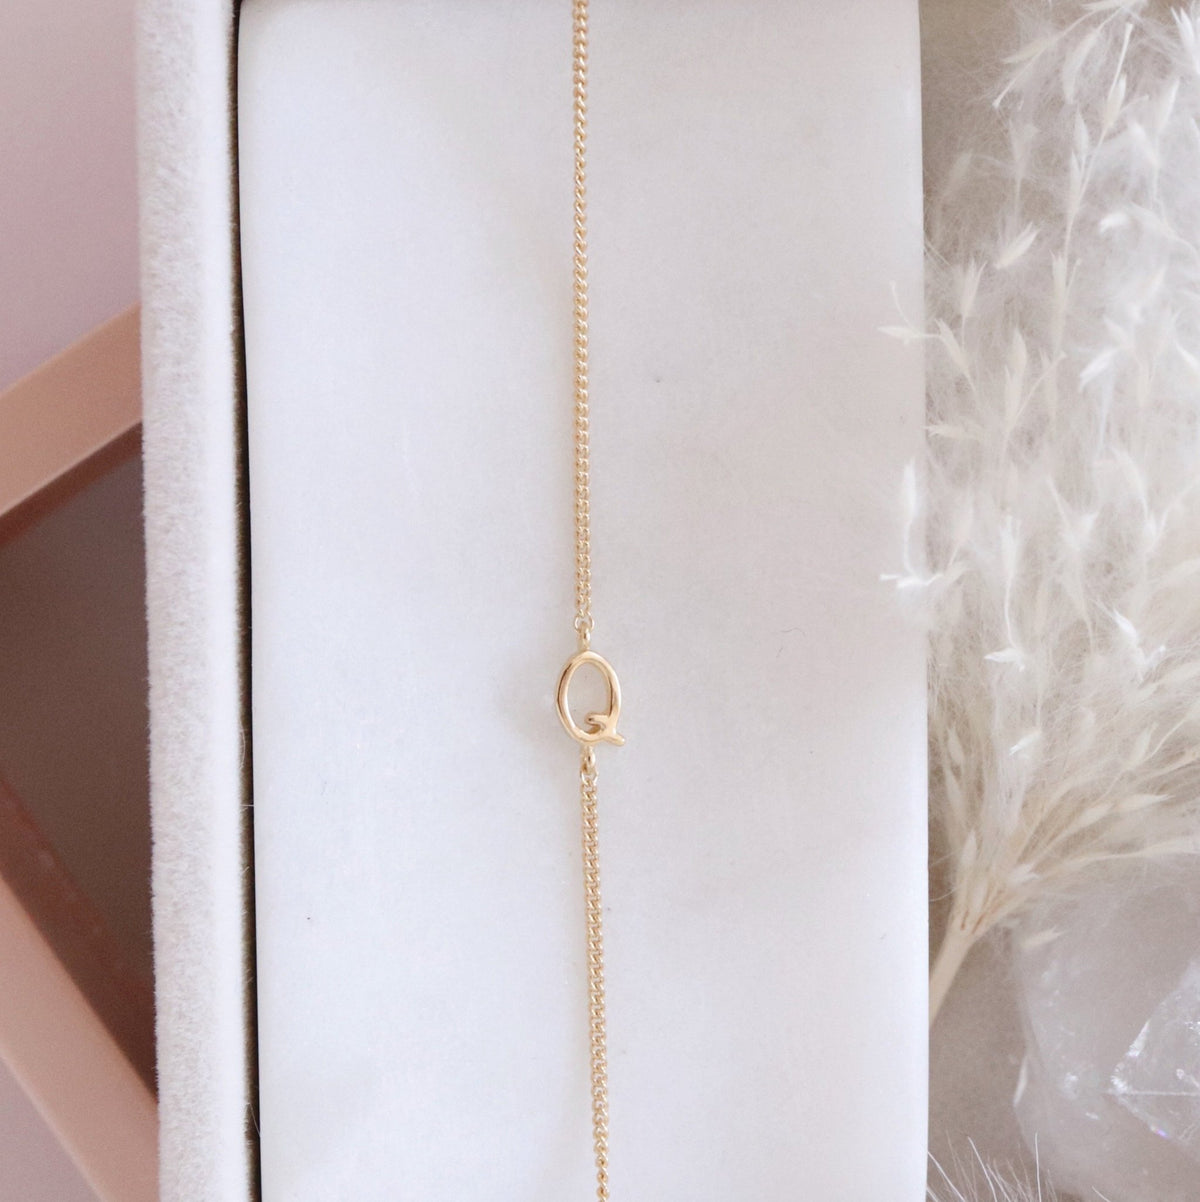 NOTABLE OFFSET INITIAL NECKLACE - Q - GOLD - SO PRETTY CARA COTTER